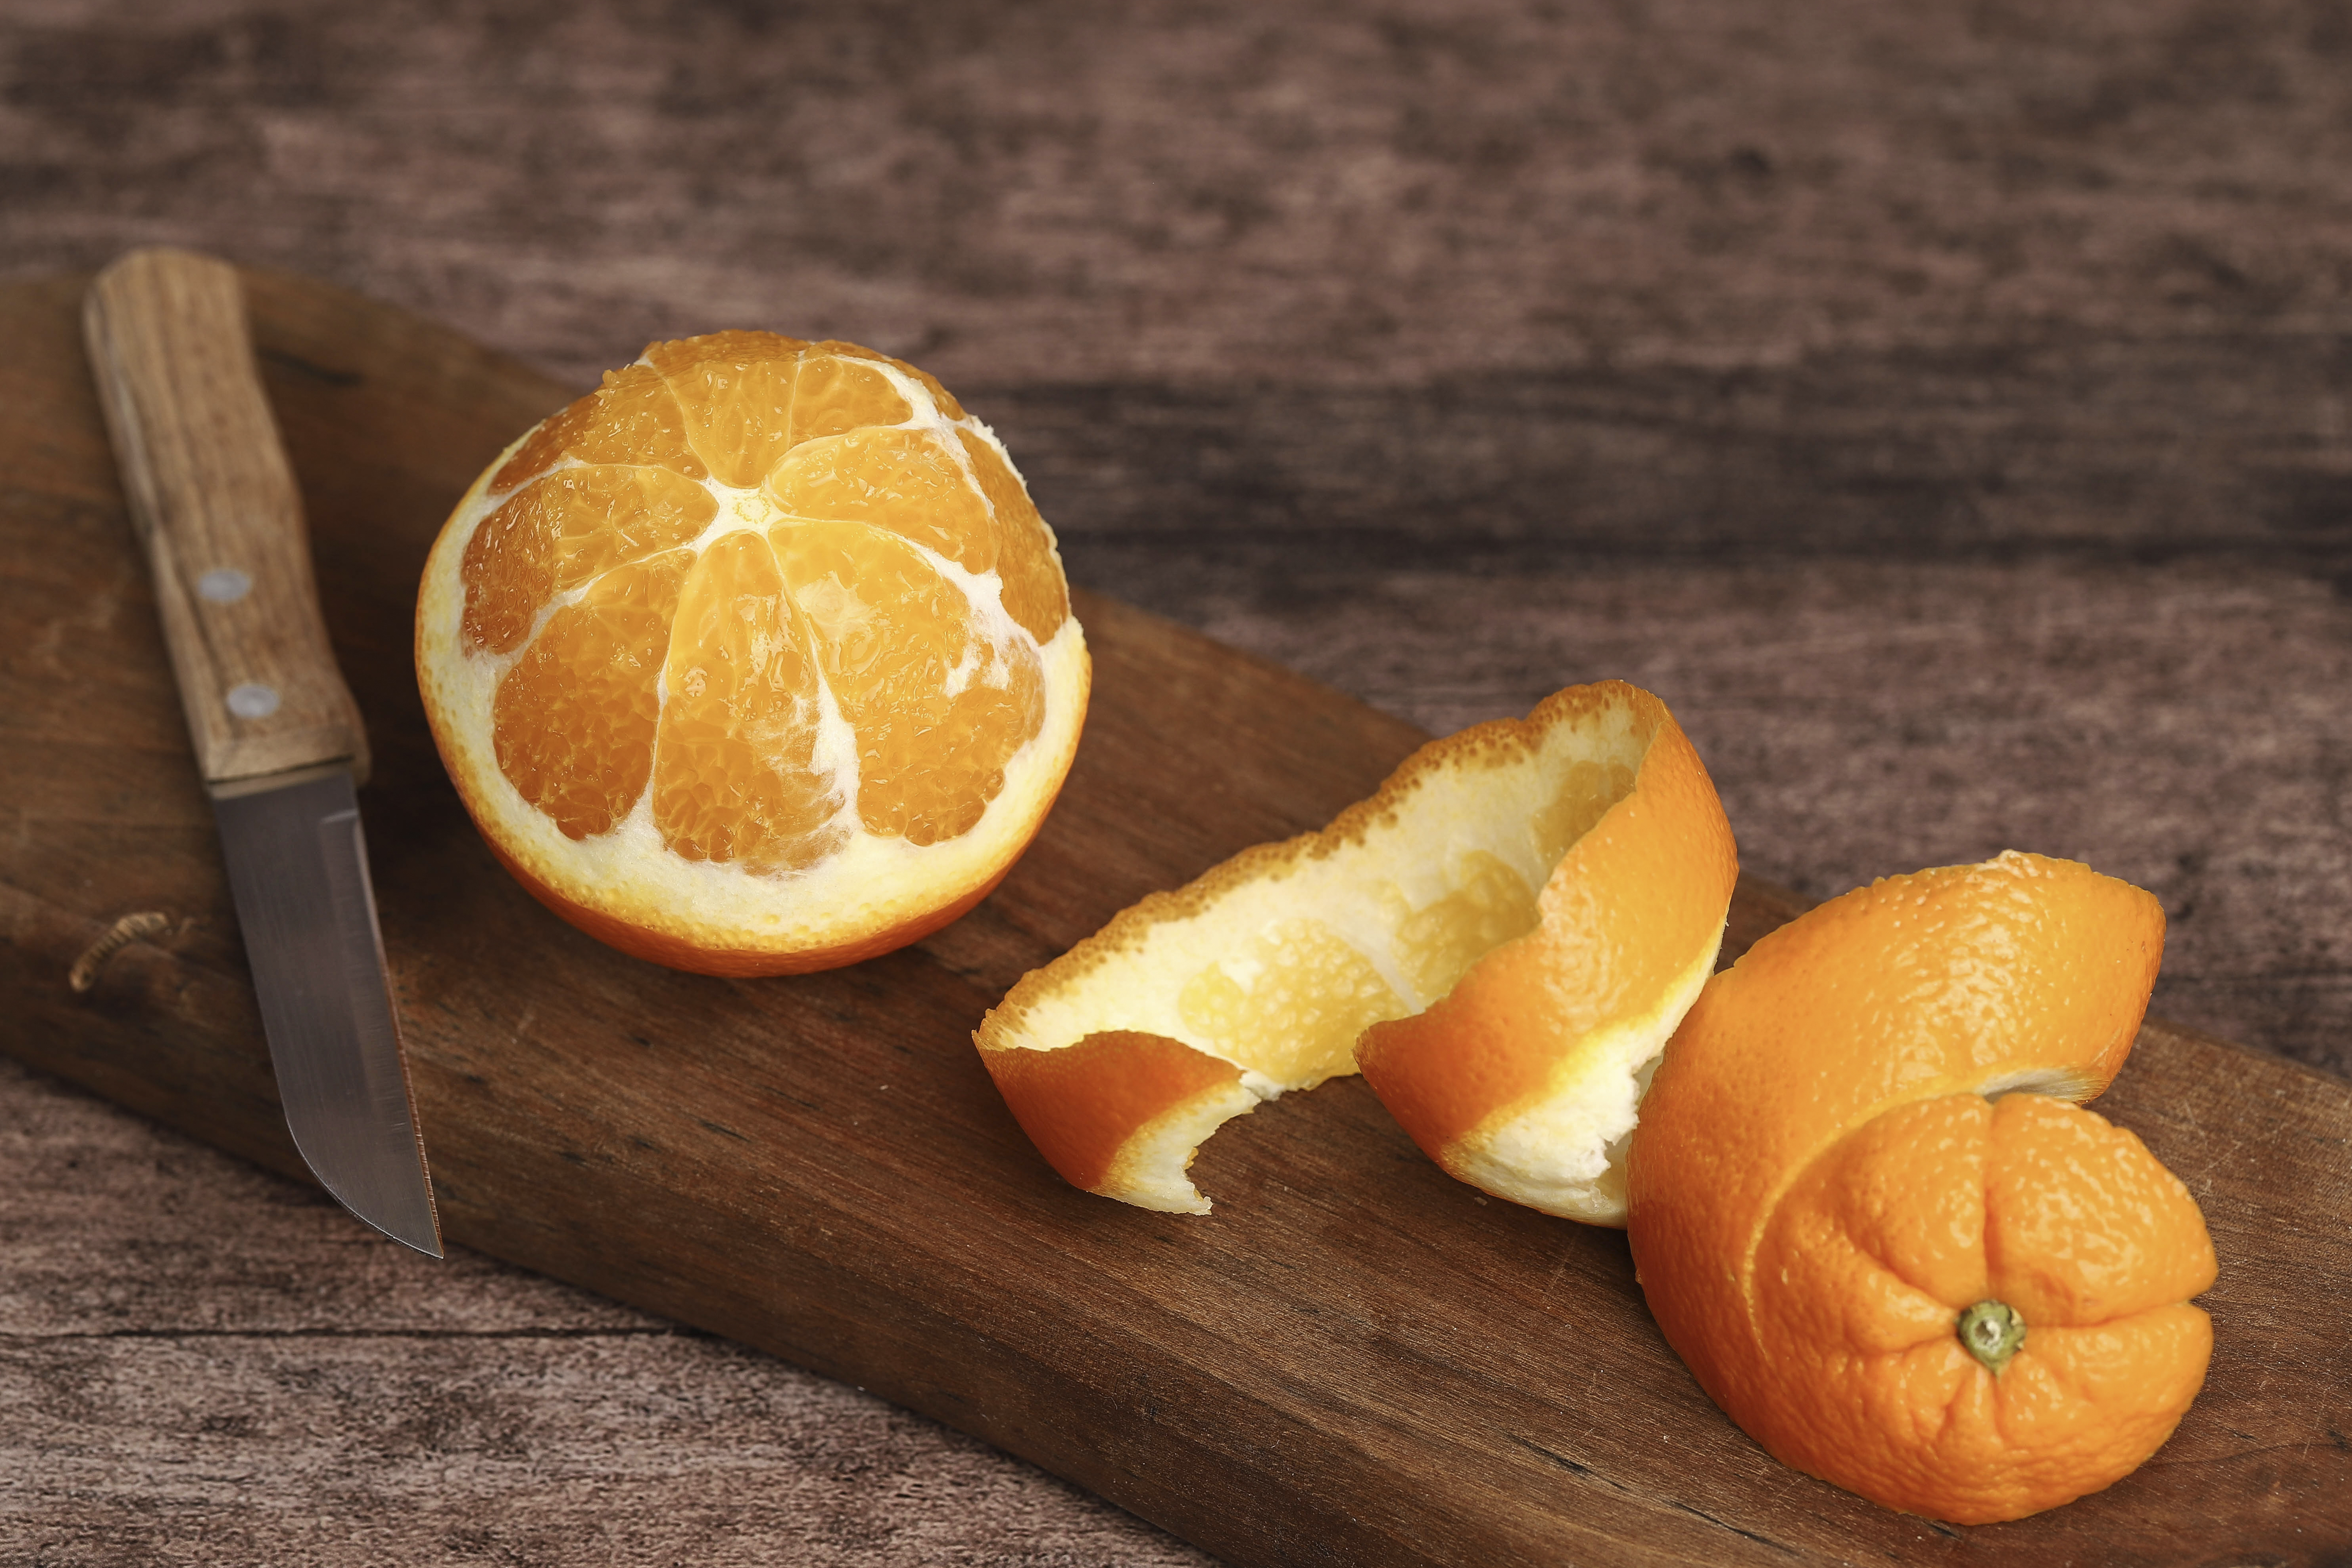 How to Make Room Deodorizer Out of Oranges | ehow